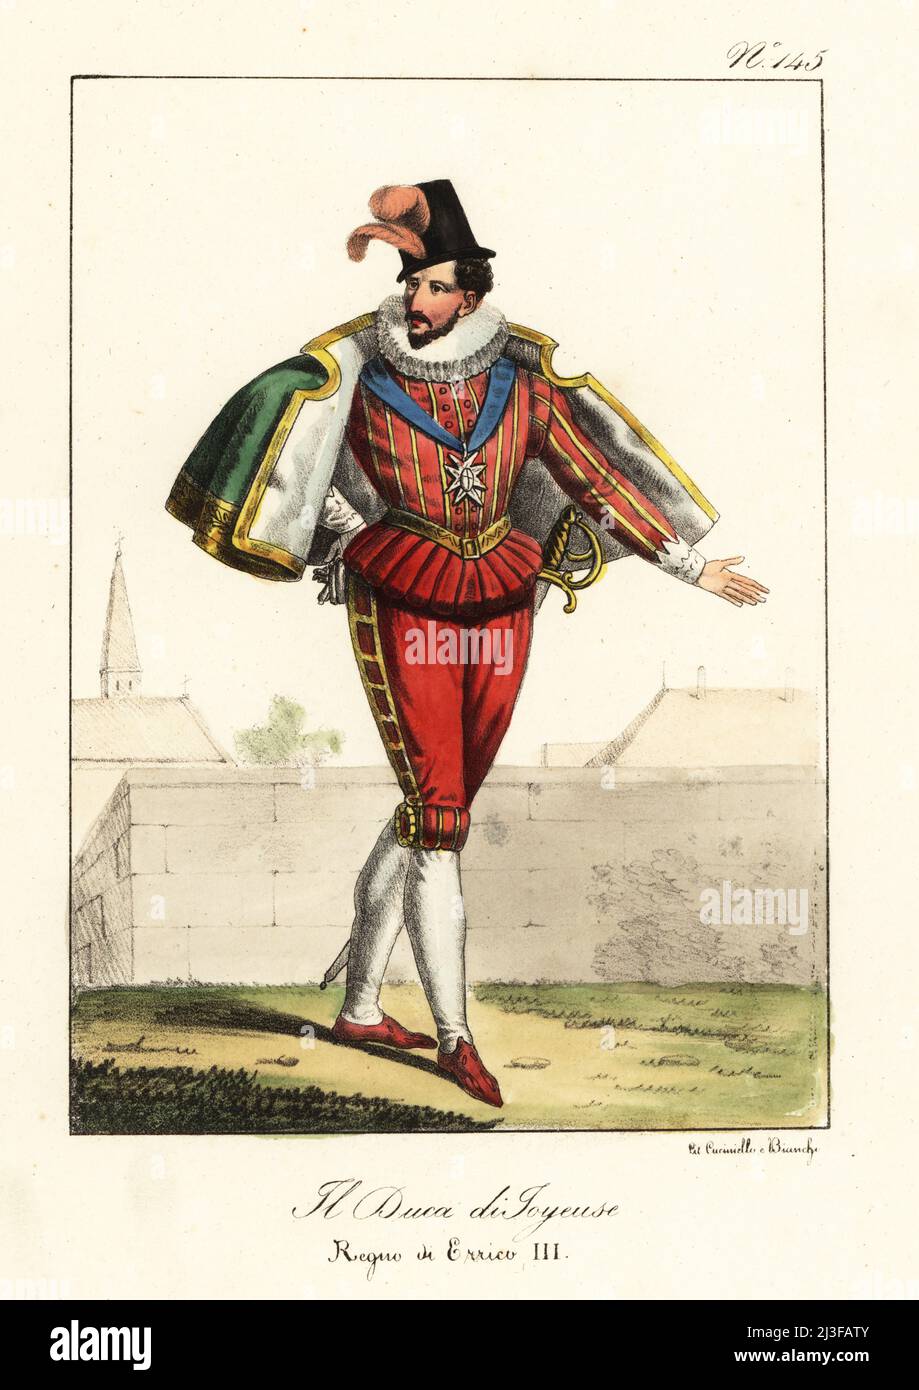 Henri, Duke of Joyeuse, 1563-1608. French army general in the French Wars of Religion, member of the Catholic League and later a Capuchin priest. Reign of King Henry III of France. Le Duc de Joyeuse, regne de Henri III. Handcoloured lithograph by Lorenzo Bianchi and Domenico Cuciniello after Hippolyte Lecomte from Costumi civili e militari della monarchia francese dal 1200 al 1820, Naples, 1825. Italian edition of Lecomte’s Civilian and military costumes of the French monarchy from 1200 to 1820. Stock Photo